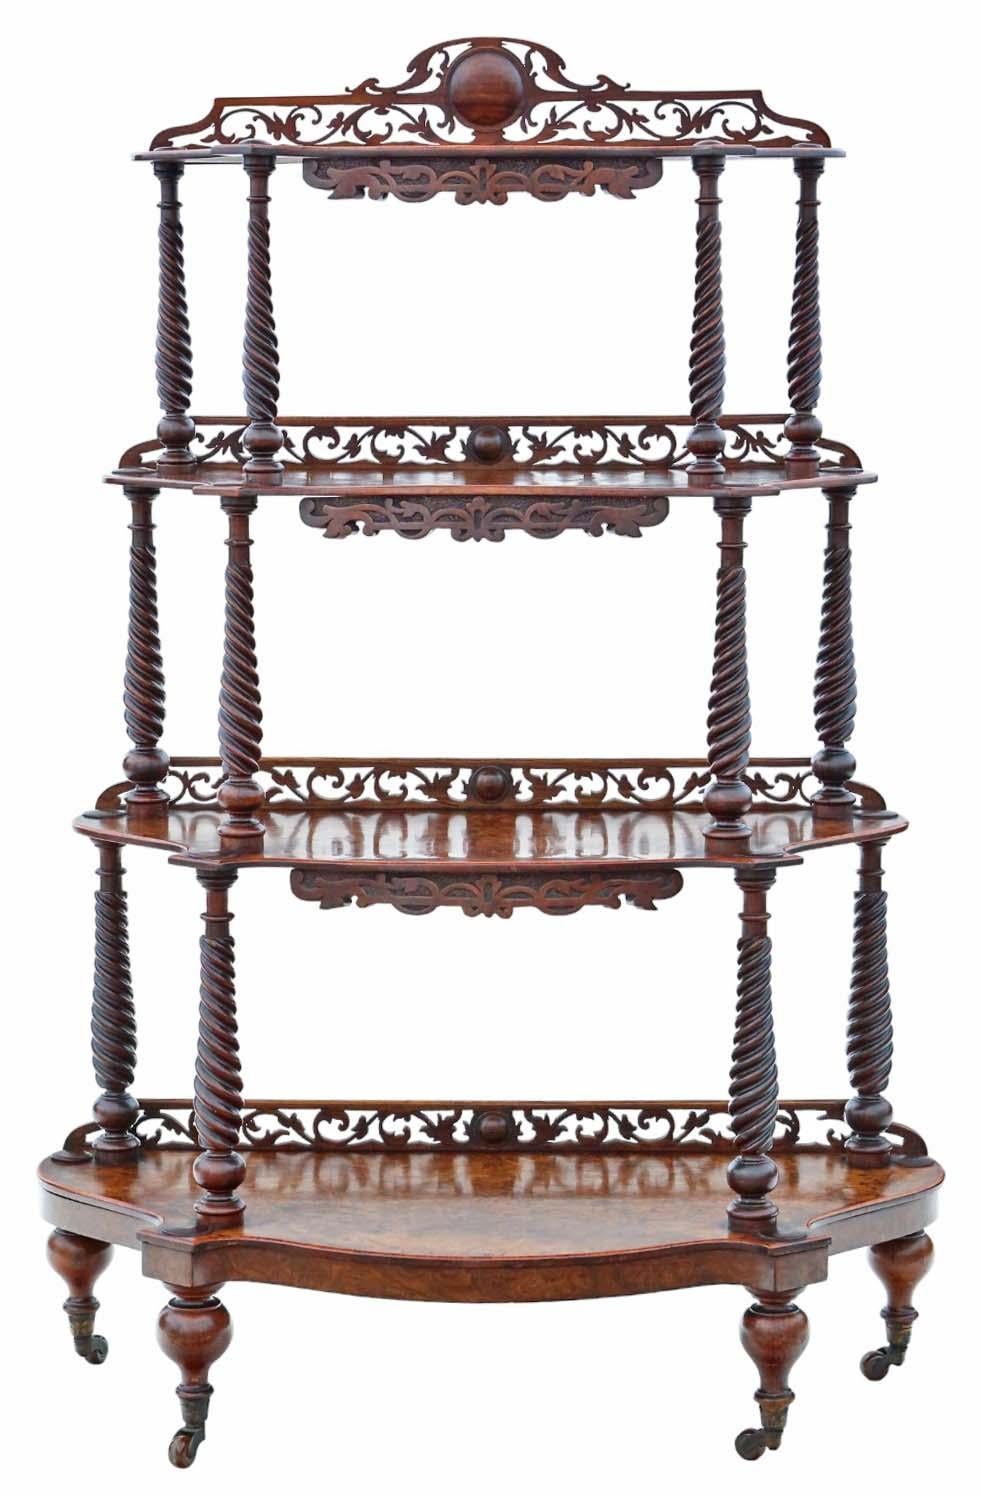 Introducing an exquisite 19th Century Burr Walnut Demi-Lune Console Table—a fine quality antique display serving whatnot that's sure to impress.

This delightful piece exudes age, charm, and character, making it a very rare decorative find. Crafted